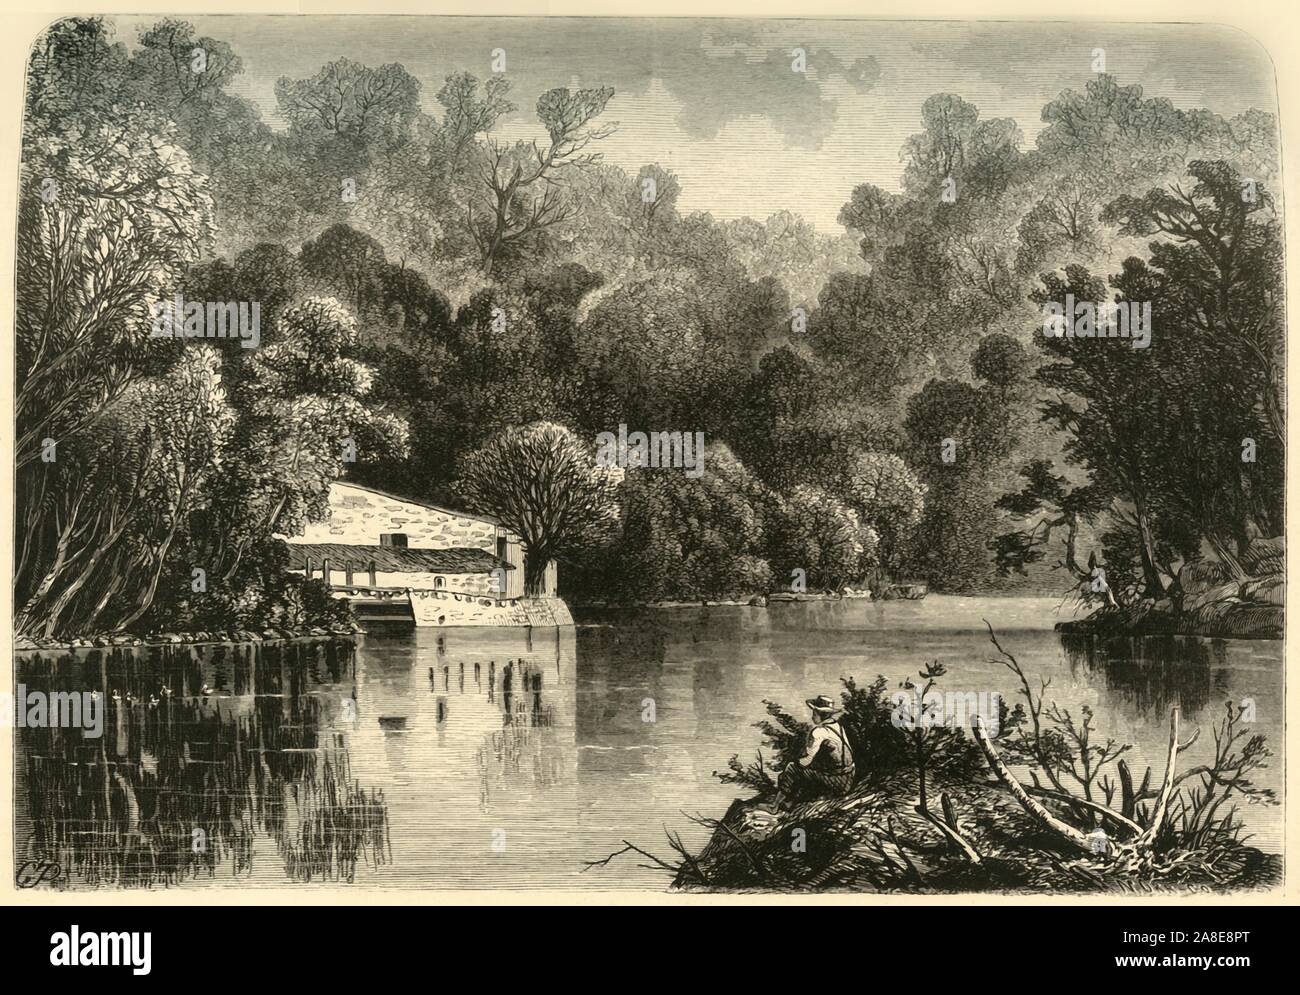 'Powder-Mills', 1872. Gunpowder mill on the Brandywine Creek, Delaware, USA. The Eleutherian Mills, used for the manufacture of explosives, were founded by the Du Pont family in the early 19th century. From &quot;Picturesque America; or, The Land We Live In, A Delineation by Pen and Pencil of the Mountains, Rivers, Lakes...with Illustrations on Steel and Wood by Eminent American Artists&quot; Vol. I, edited by William Cullen Bryant. [D. Appleton and Company, New York, 1872] Stock Photo